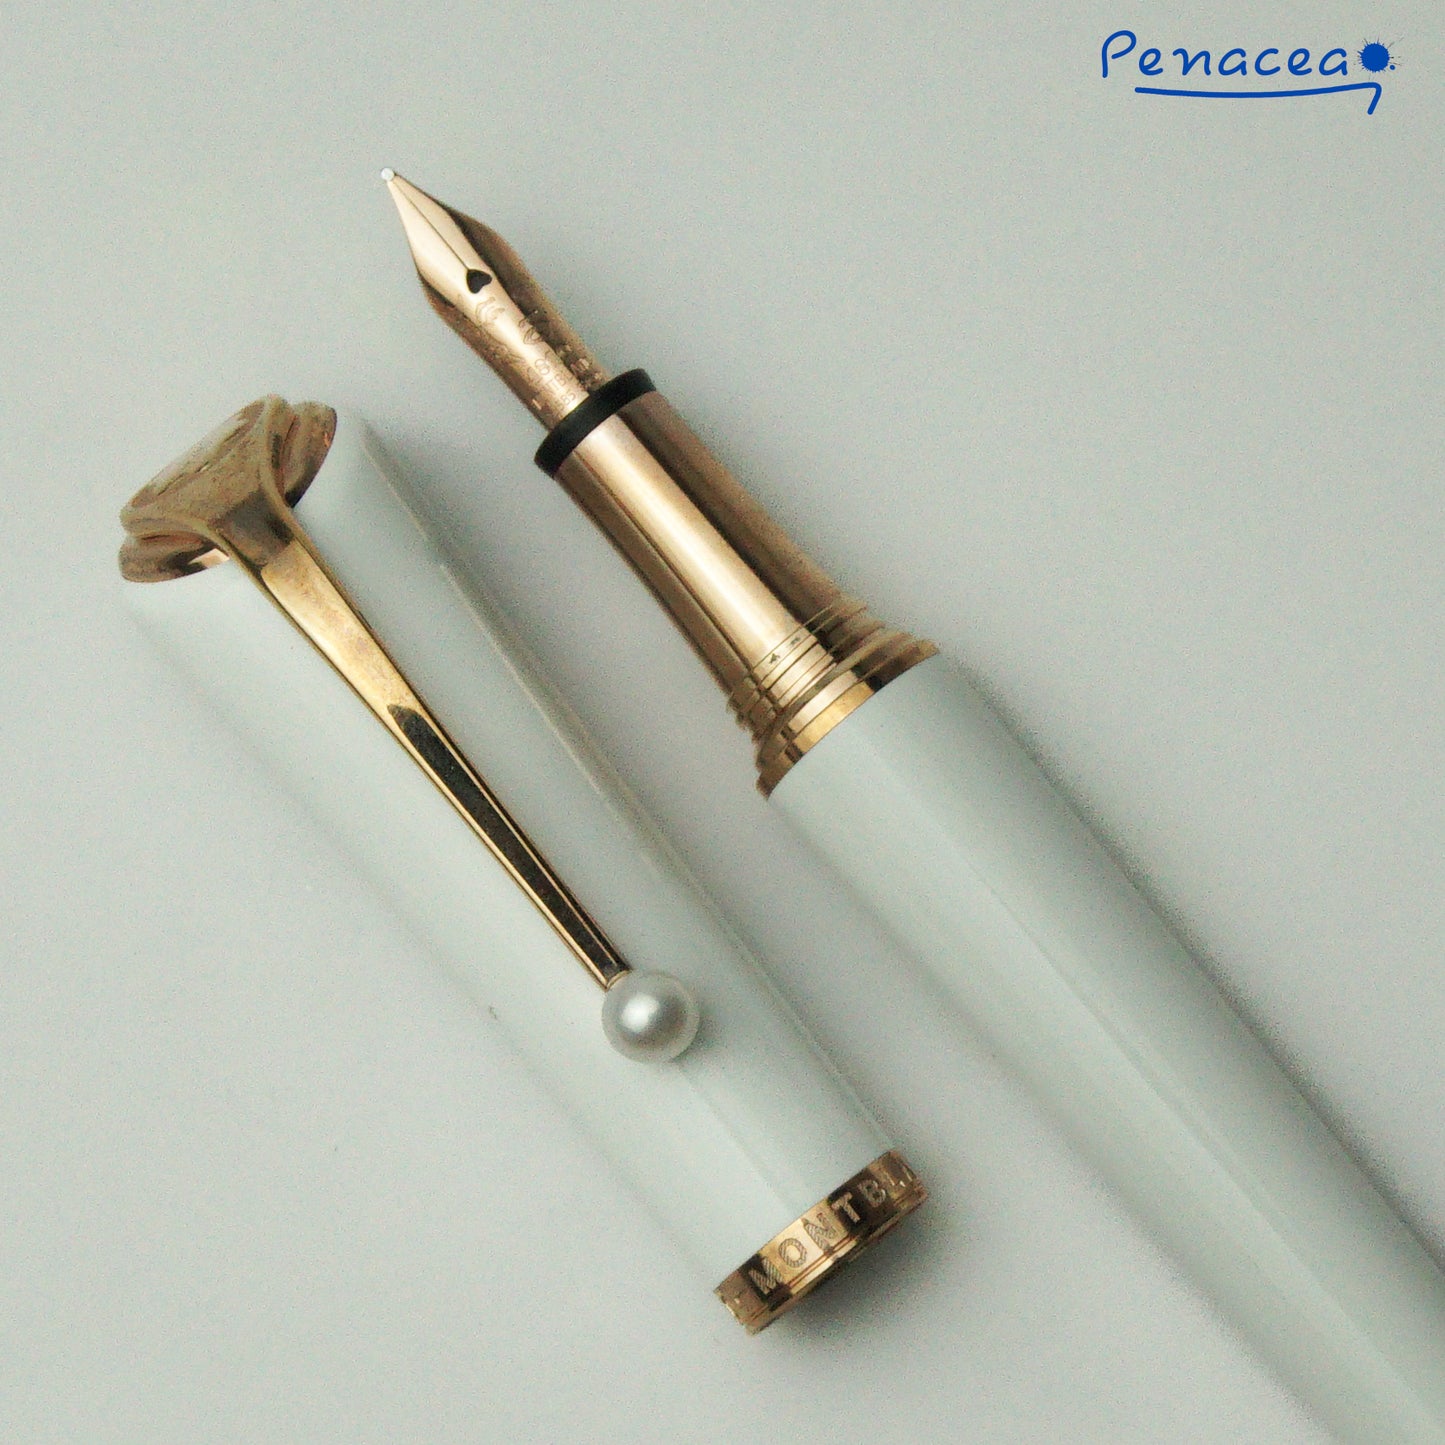 MONTBLANC MUSES MARILYN MONROE SPECIAL EDITION PEARL WHITE FOUNTAIN PEN (2018)